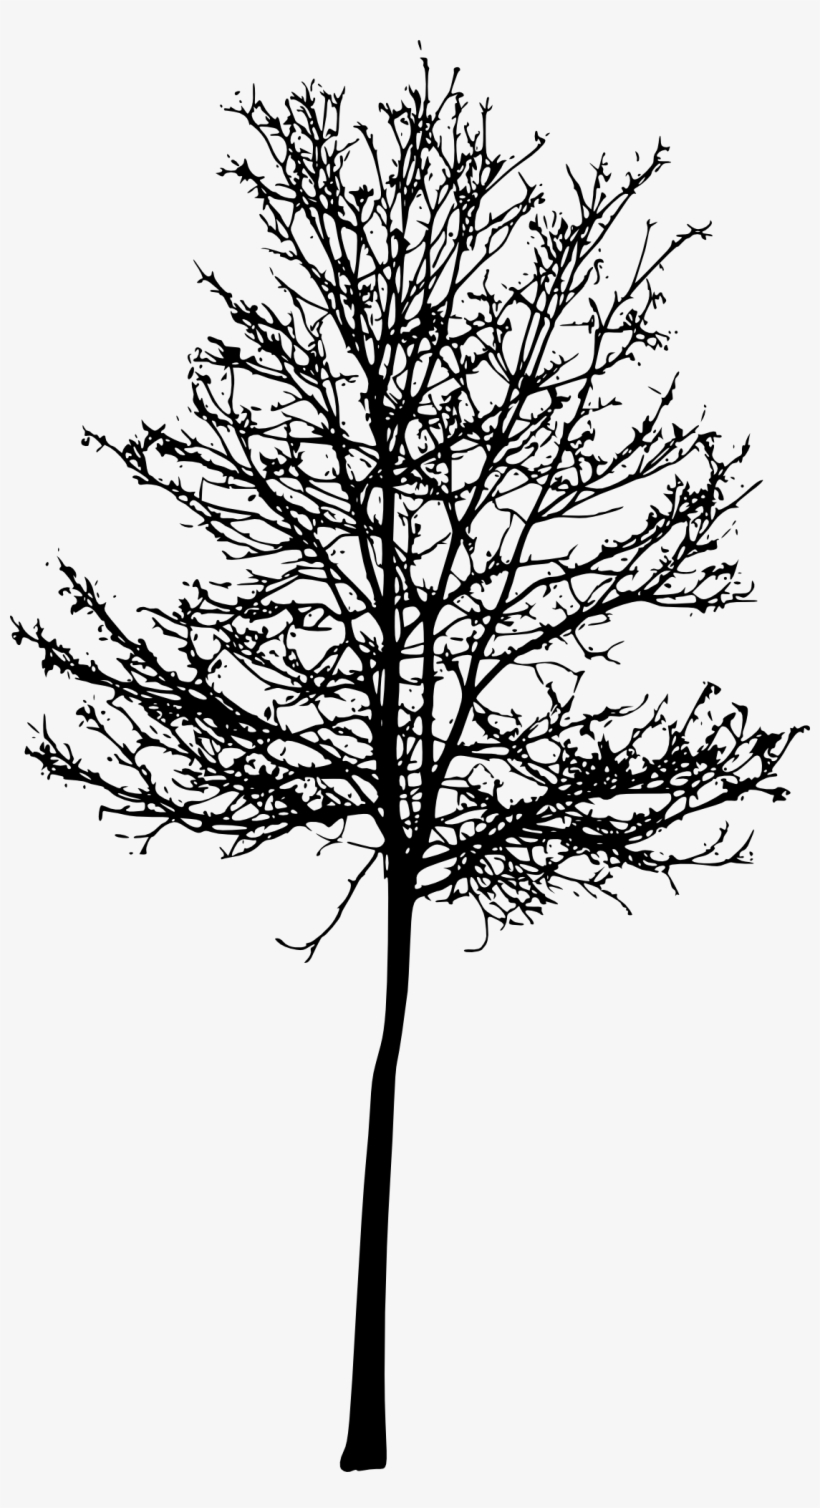 Tree Silhouette Png Roots - Portable Network Graphics, transparent png #4279477